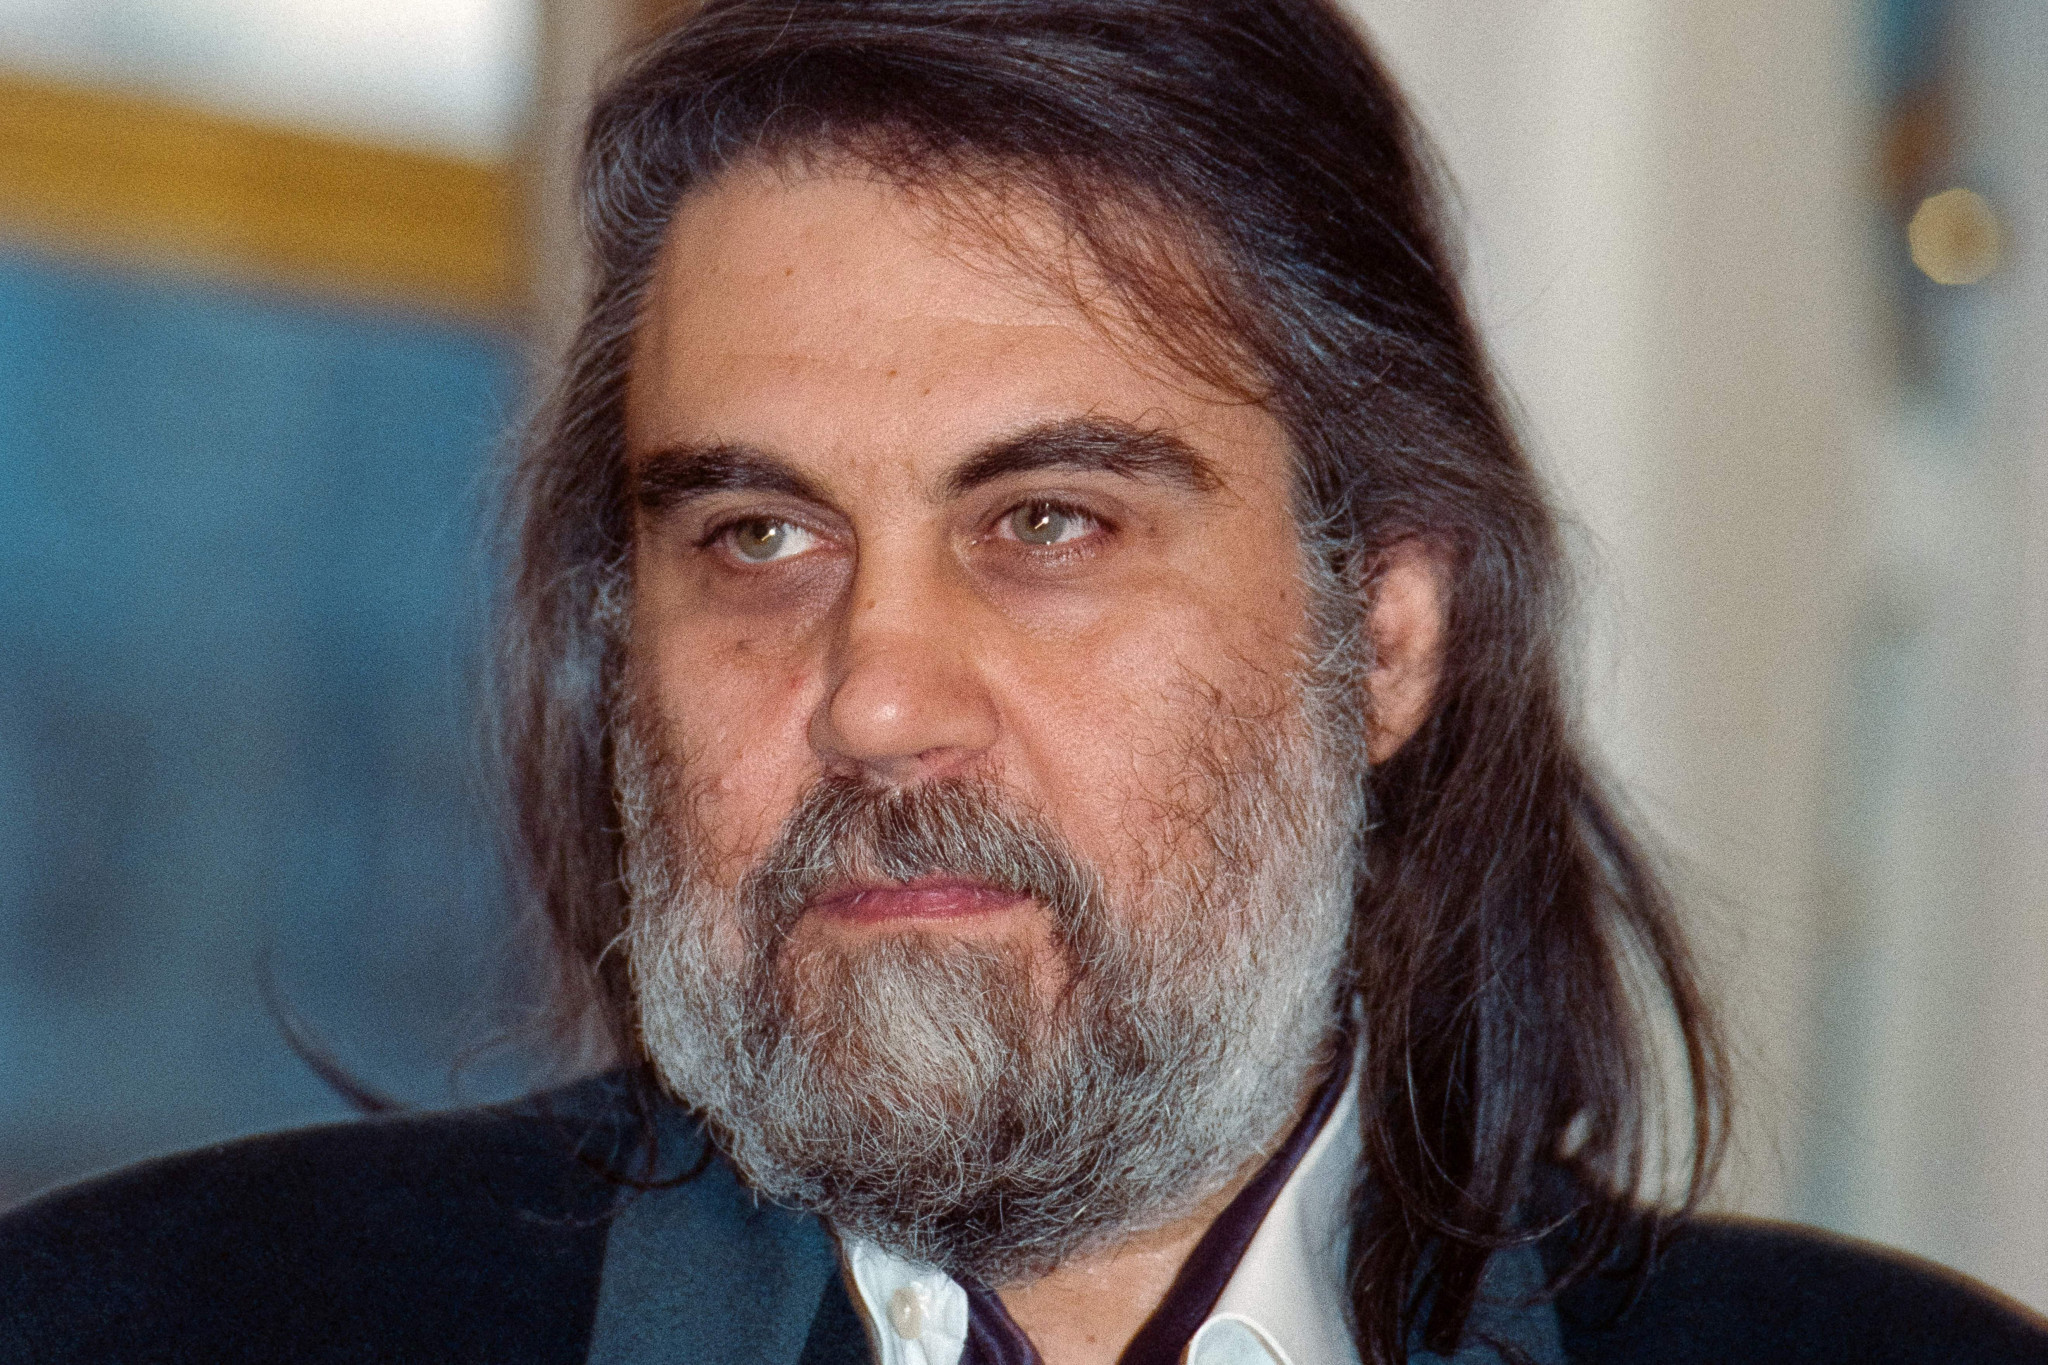 Vangelis, Chariots of Fire composer forever associated with the Olympics, dies at 79